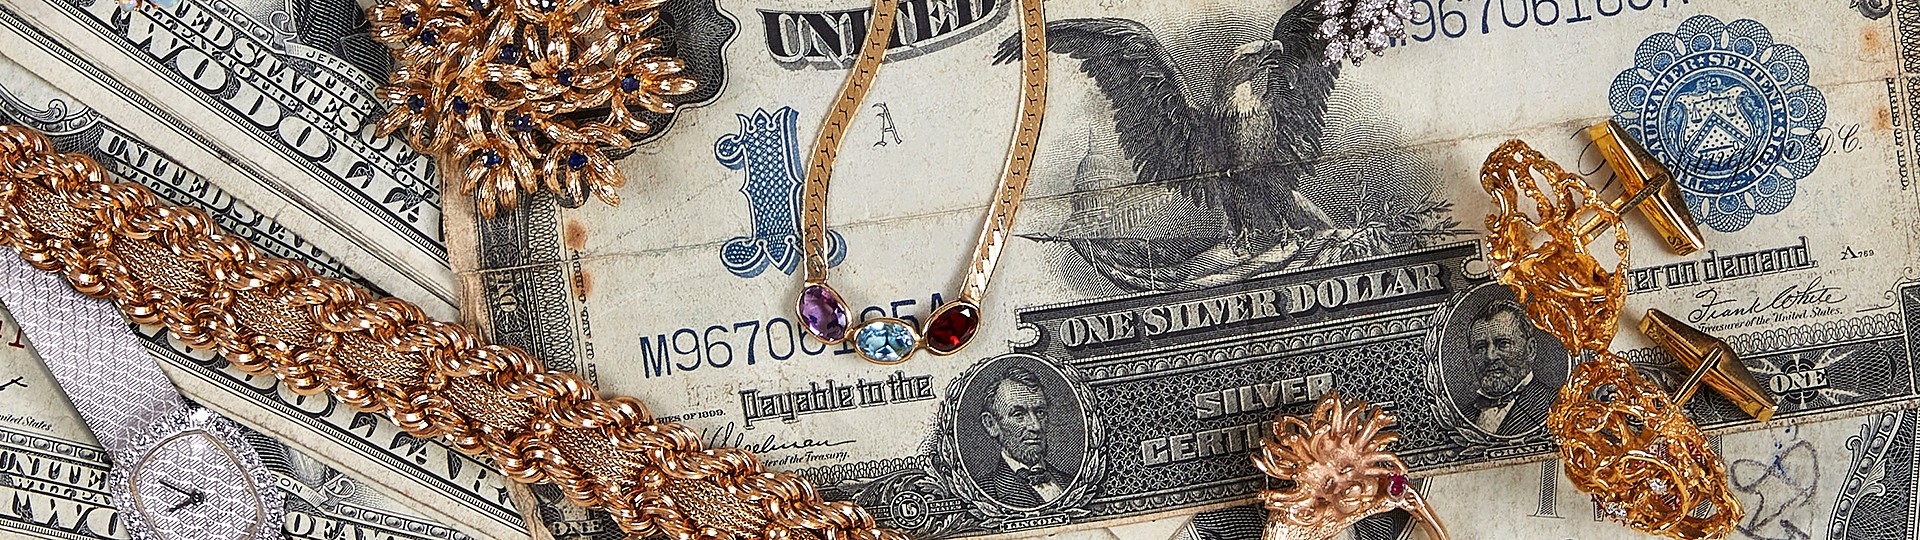 Online Only Coins & Jewelry by Pook & Pook Inc.